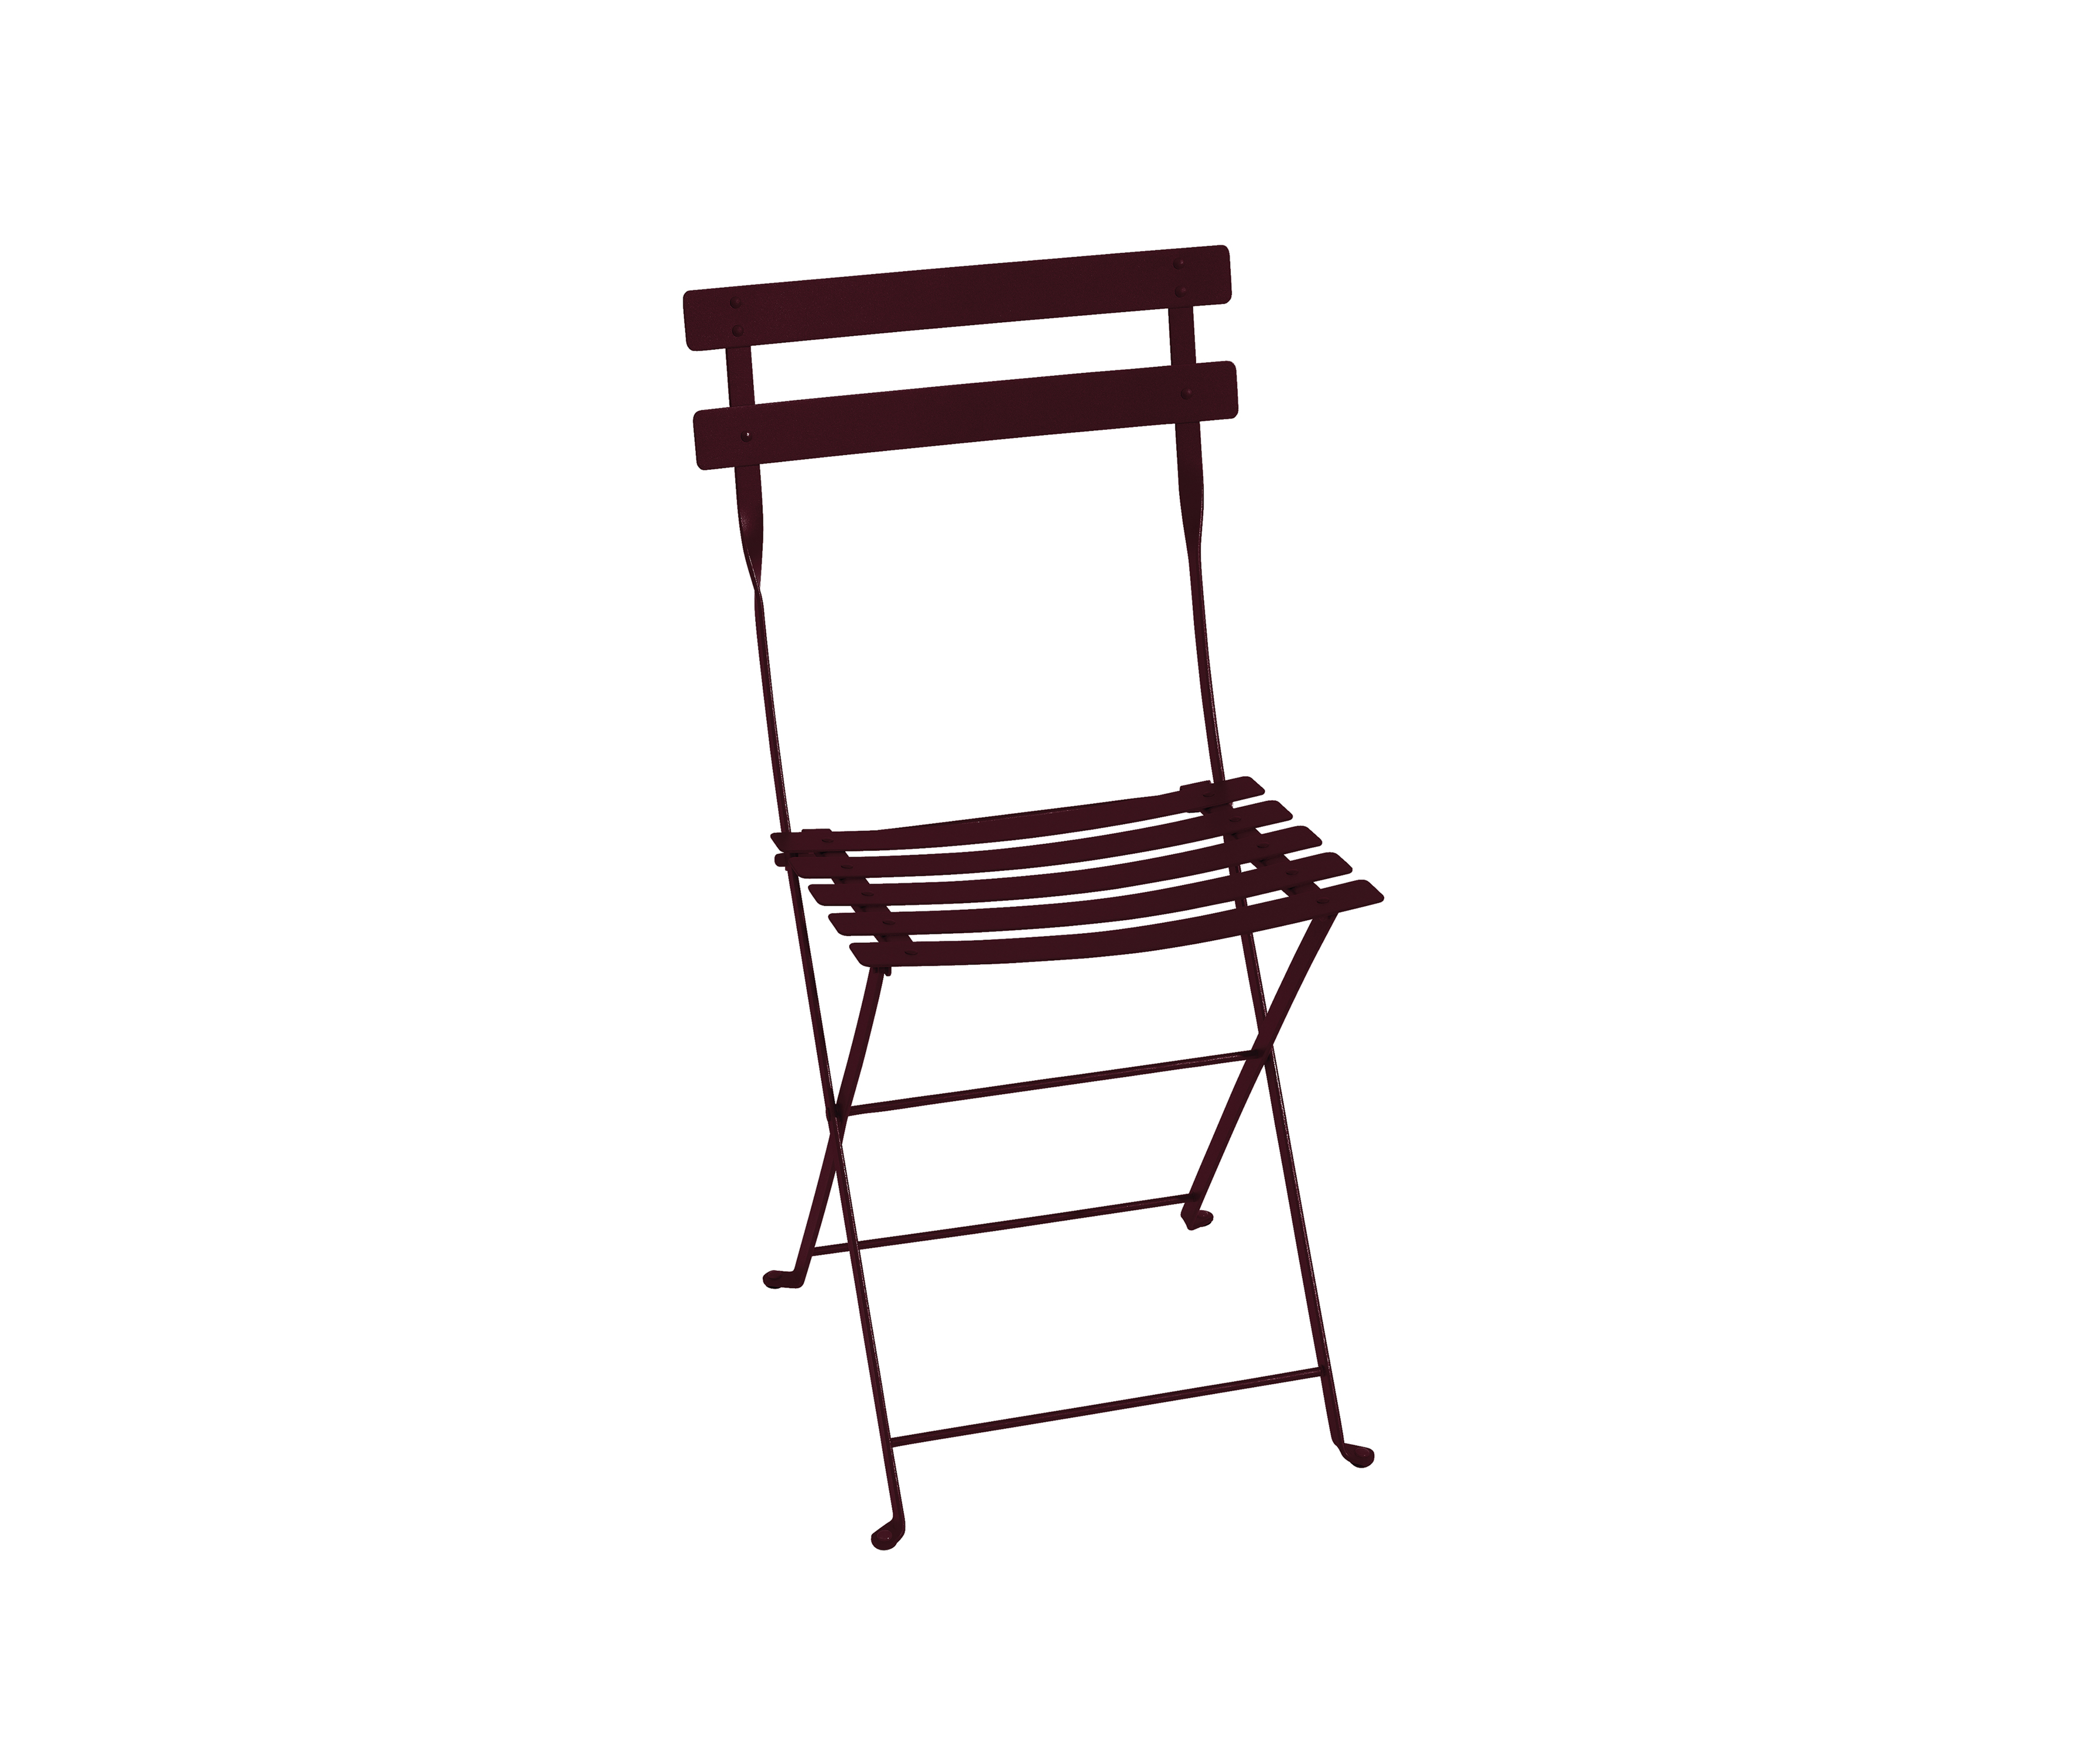 Fermob_Bistro Chair_Black Cherry_int_product